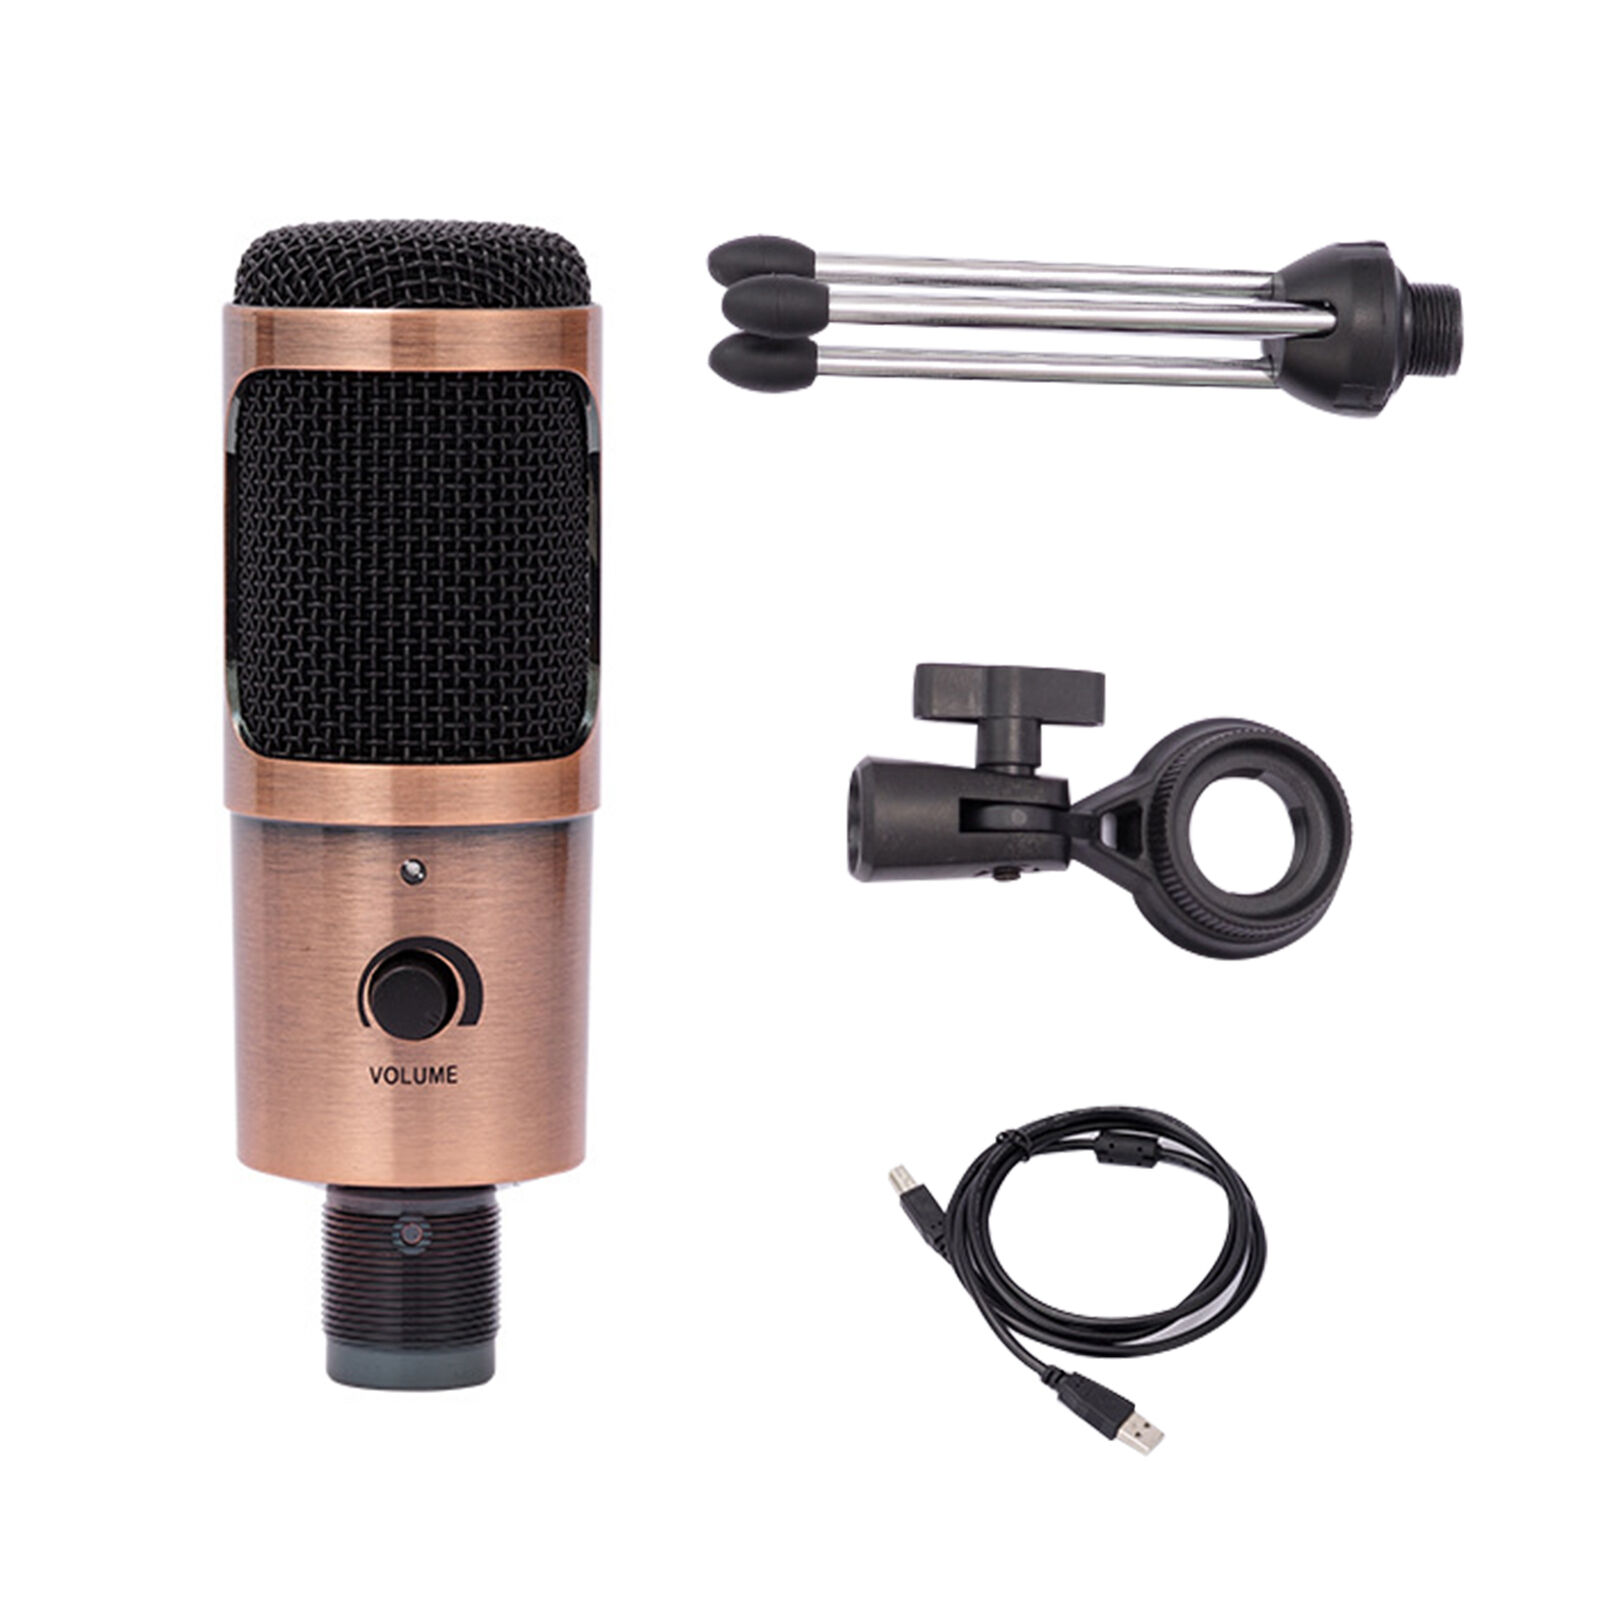 Condenser Microphone Usb Widely Compatible Plug Play Handheld Microphone Compact